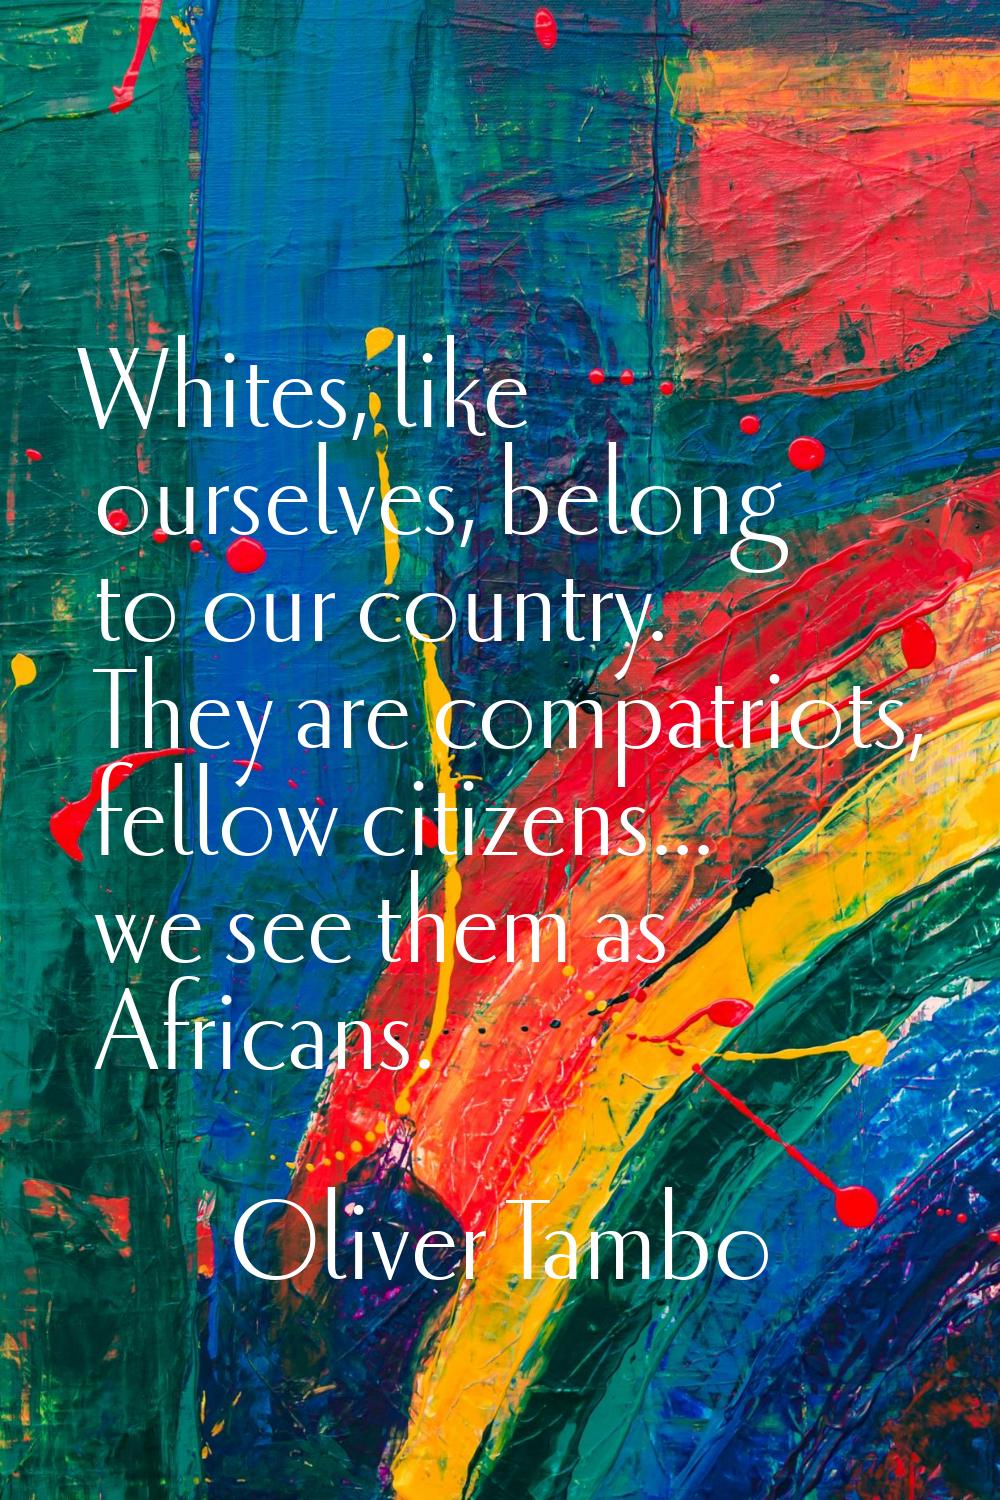 Whites, like ourselves, belong to our country. They are compatriots, fellow citizens... we see them